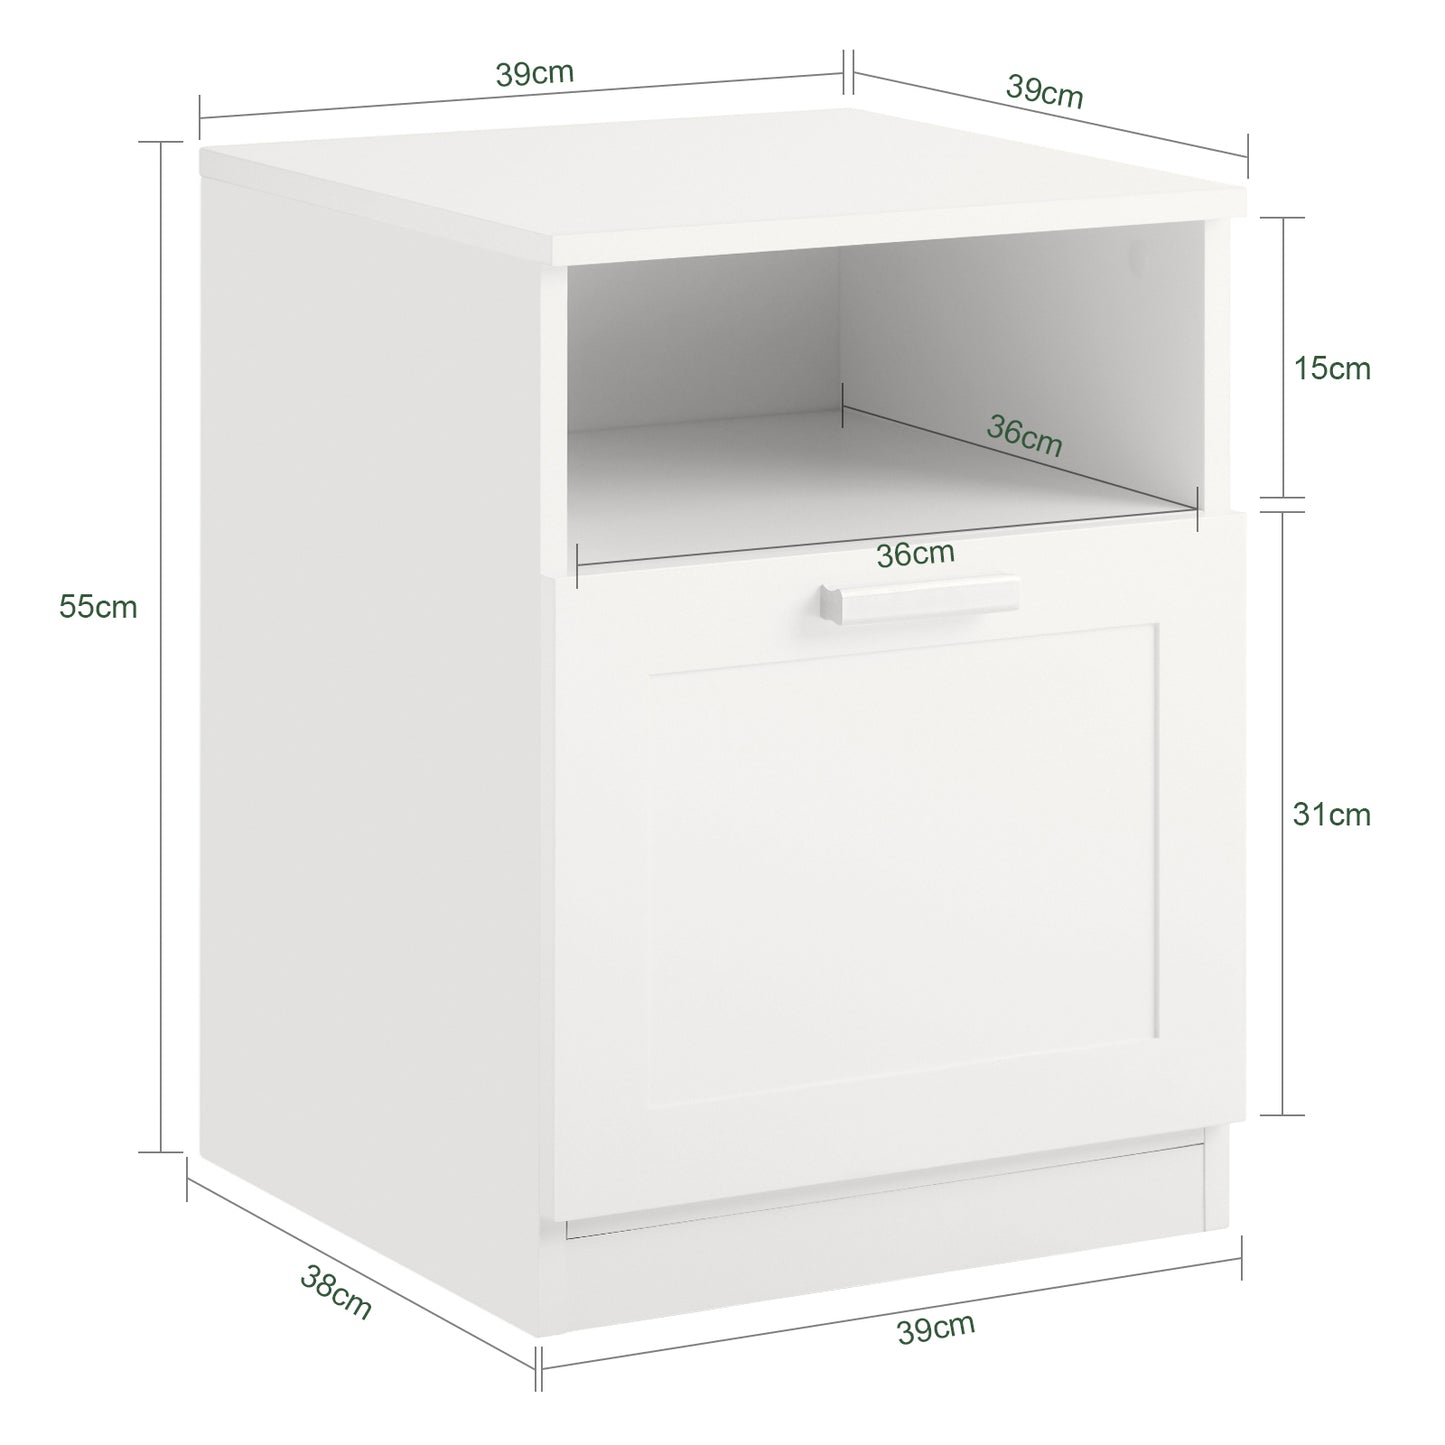 SoBuy White Bedside Table with Shelf and Large Drawer D39xW39xH55cm